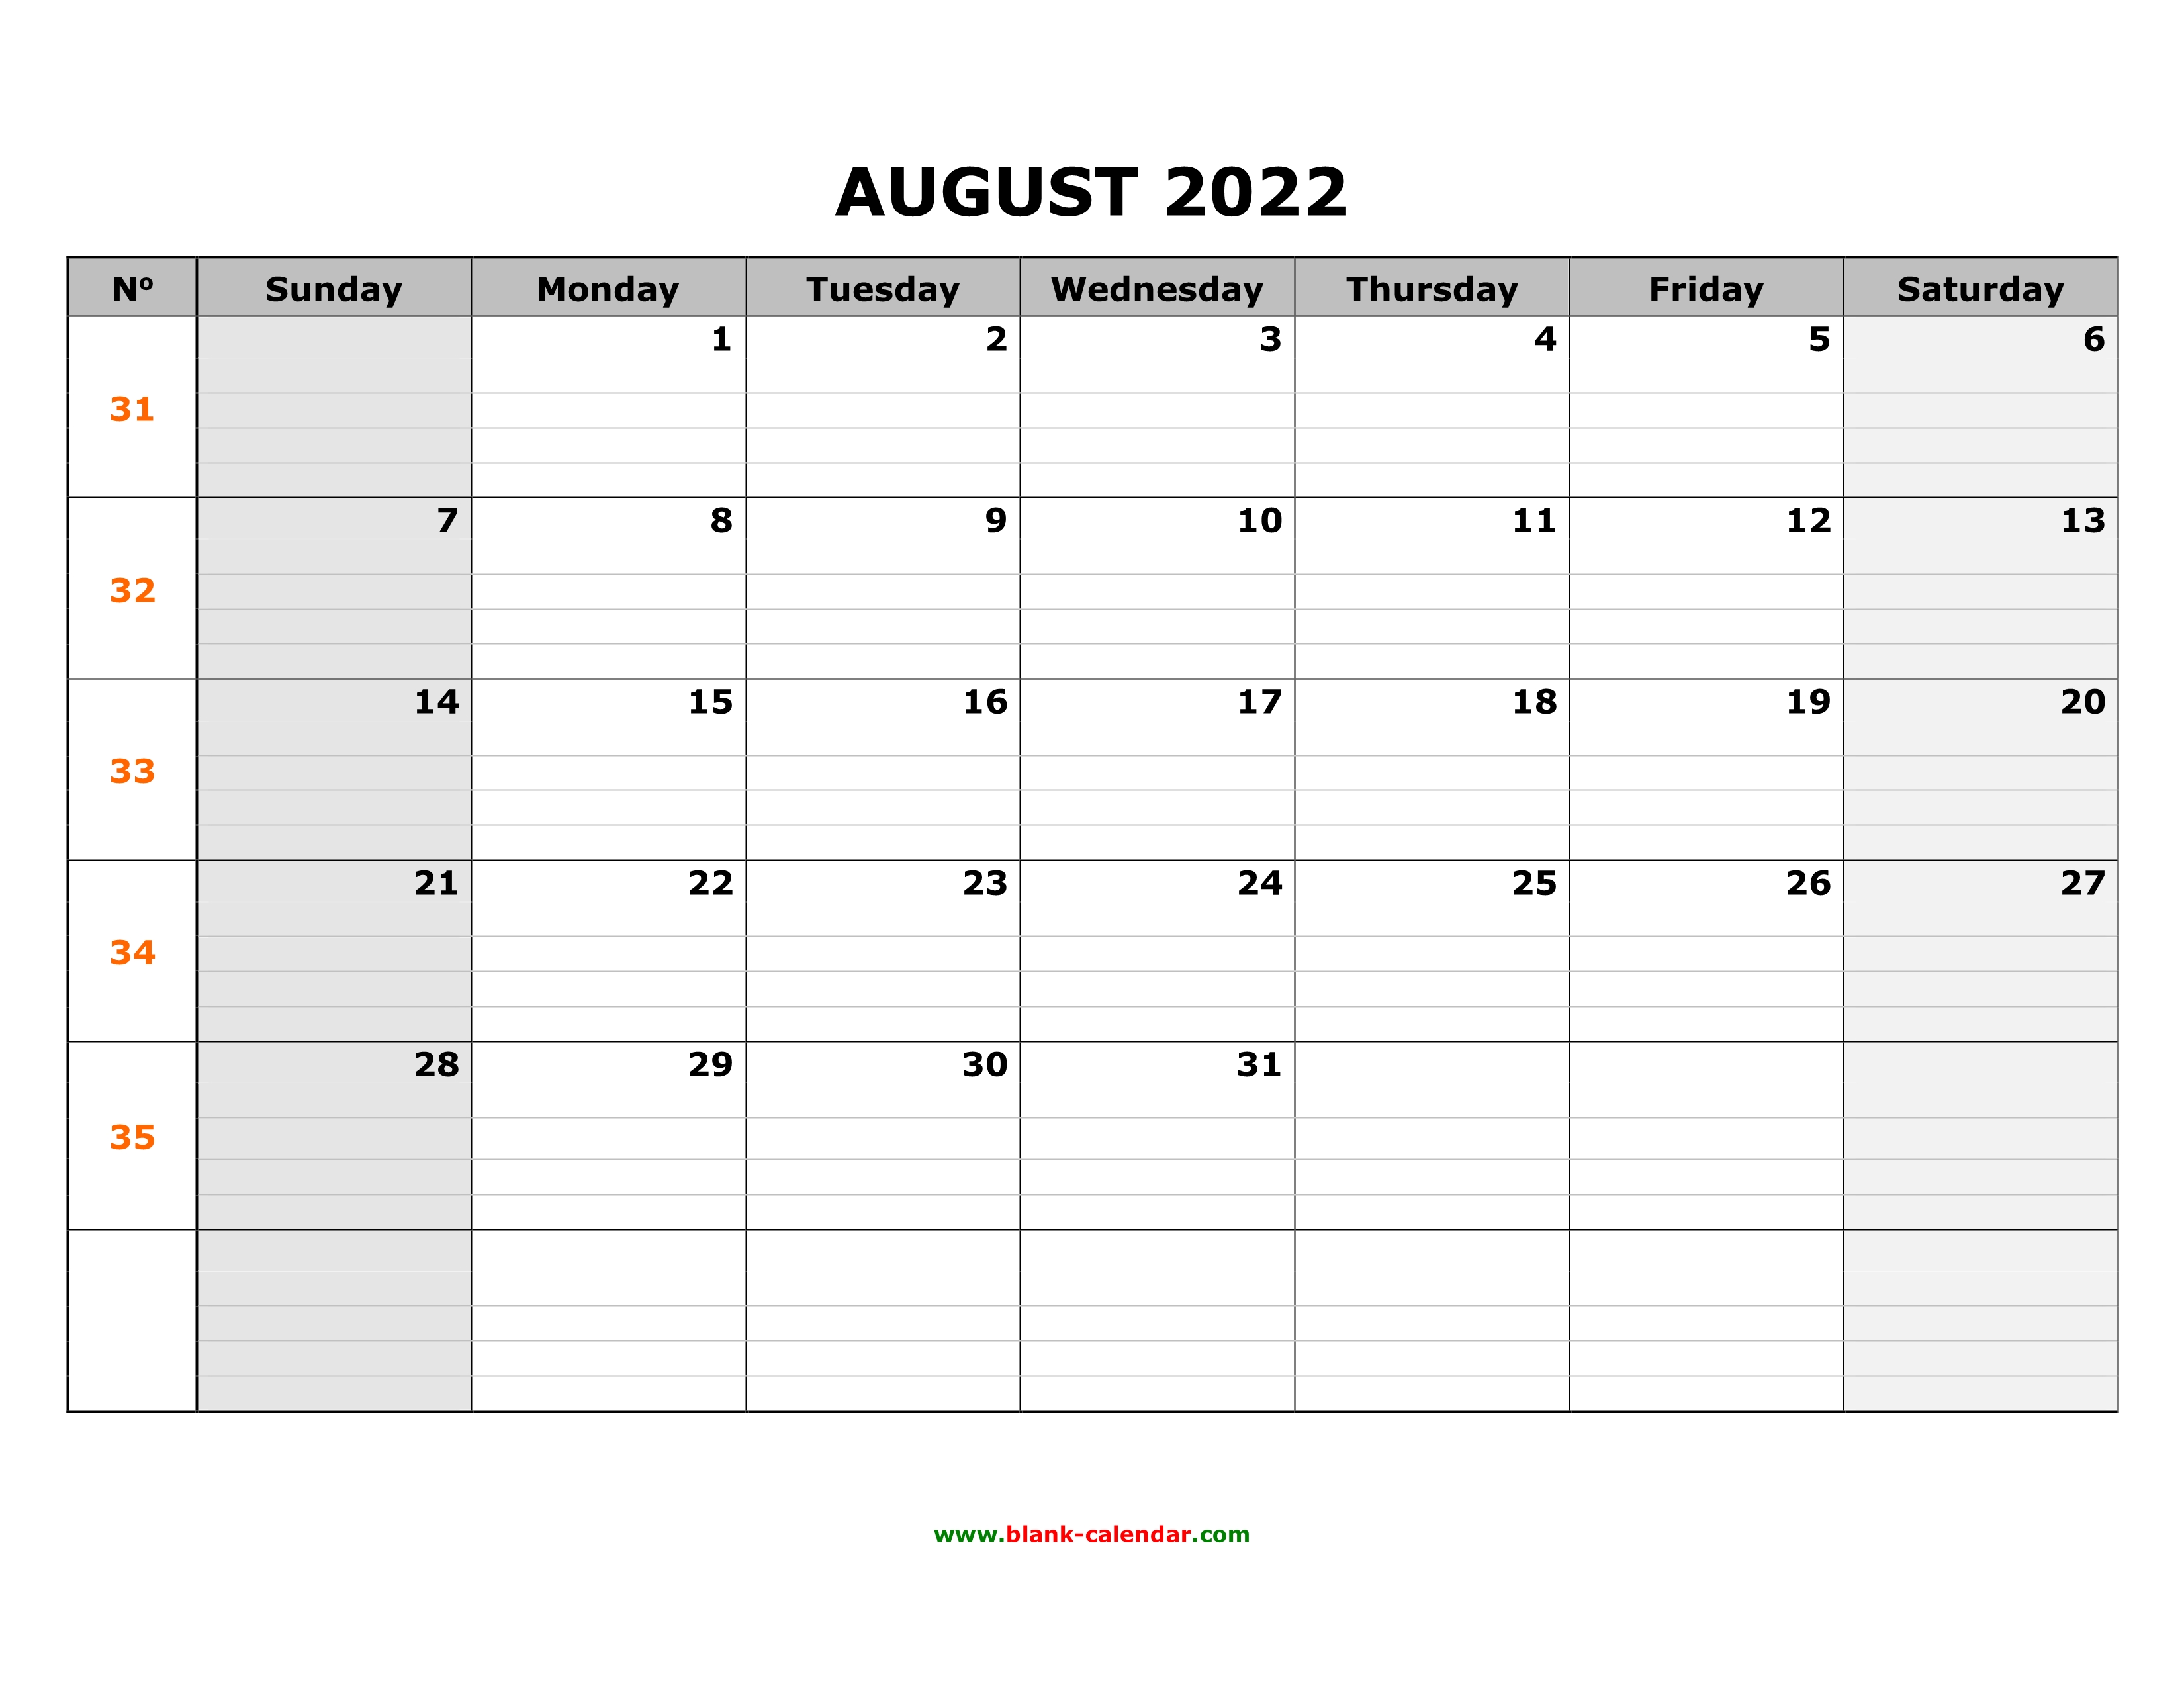 Free Download Printable August 2022 Calendar Large Box Grid Space For Notes